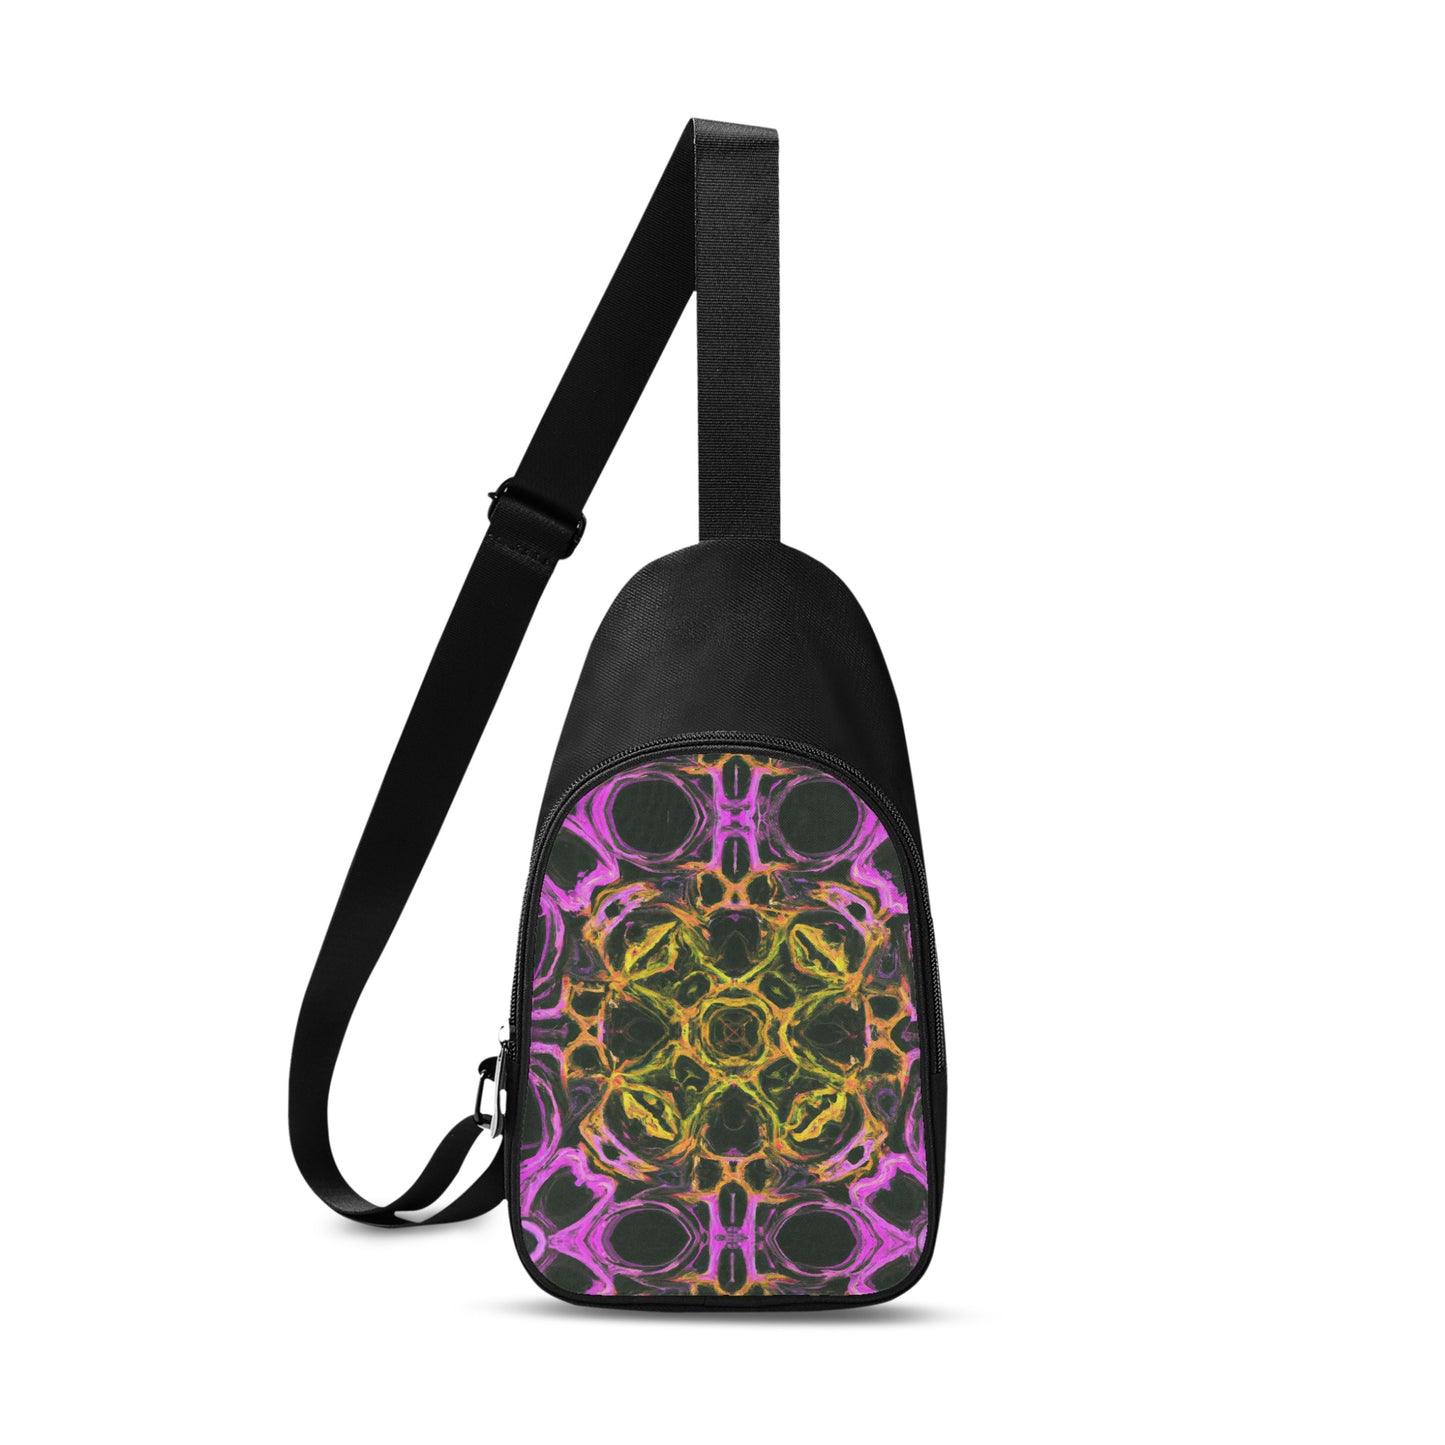 This unisex chest bag captivates onlookers with its dazzling digitally printed design on the front, depicting an enticing purple honeycomb motif inspired by psychedelia.